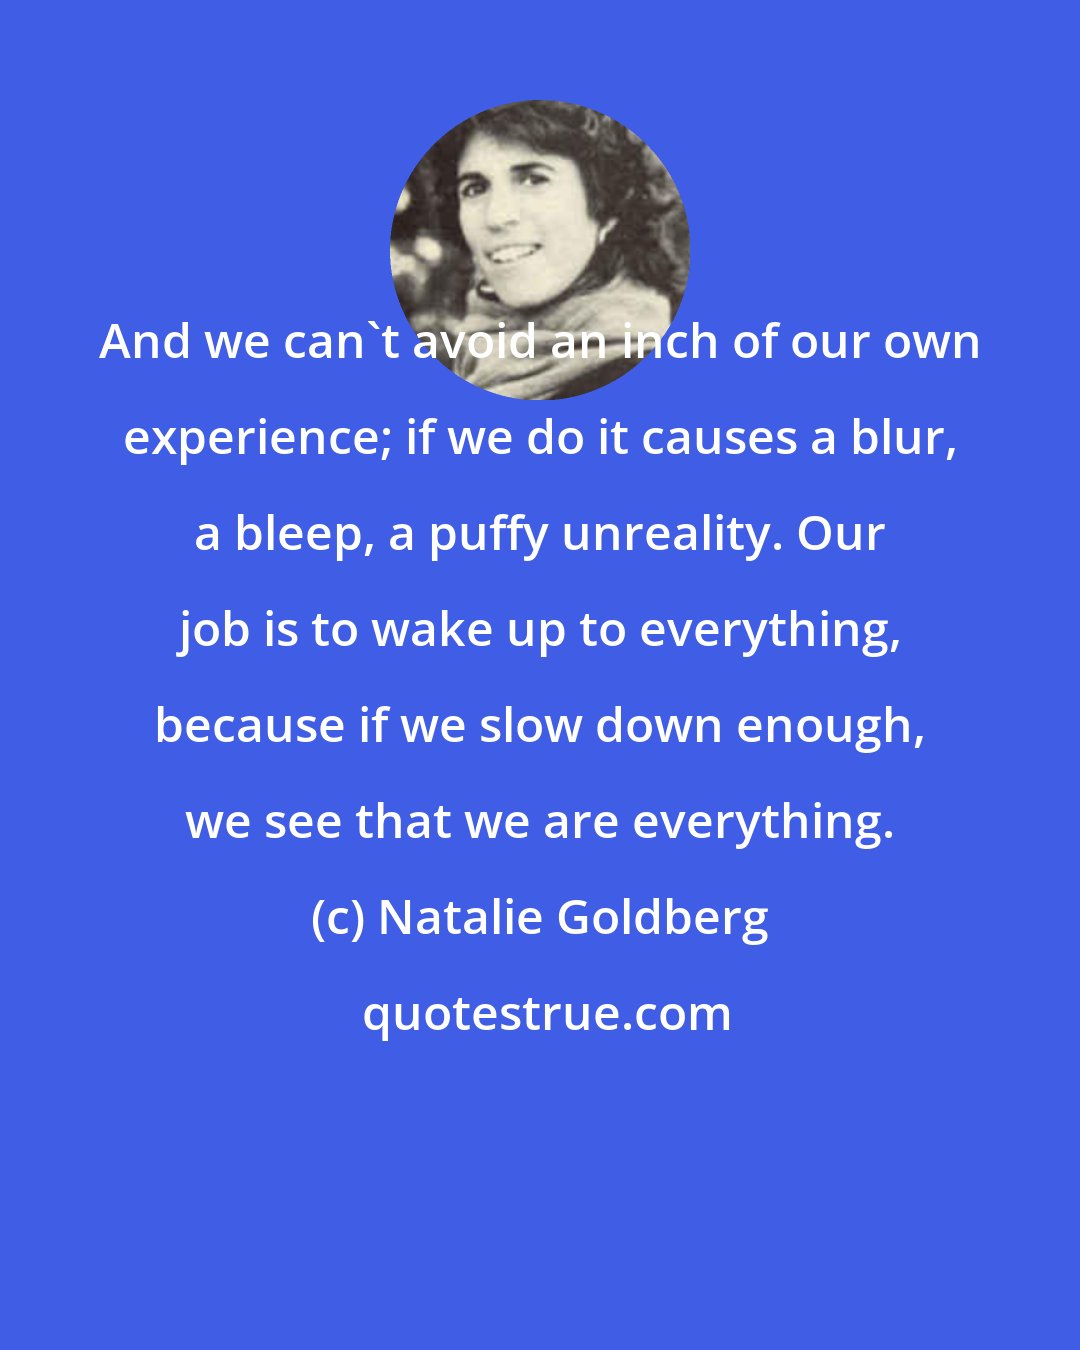 Natalie Goldberg: And we can't avoid an inch of our own experience; if we do it causes a blur, a bleep, a puffy unreality. Our job is to wake up to everything, because if we slow down enough, we see that we are everything.